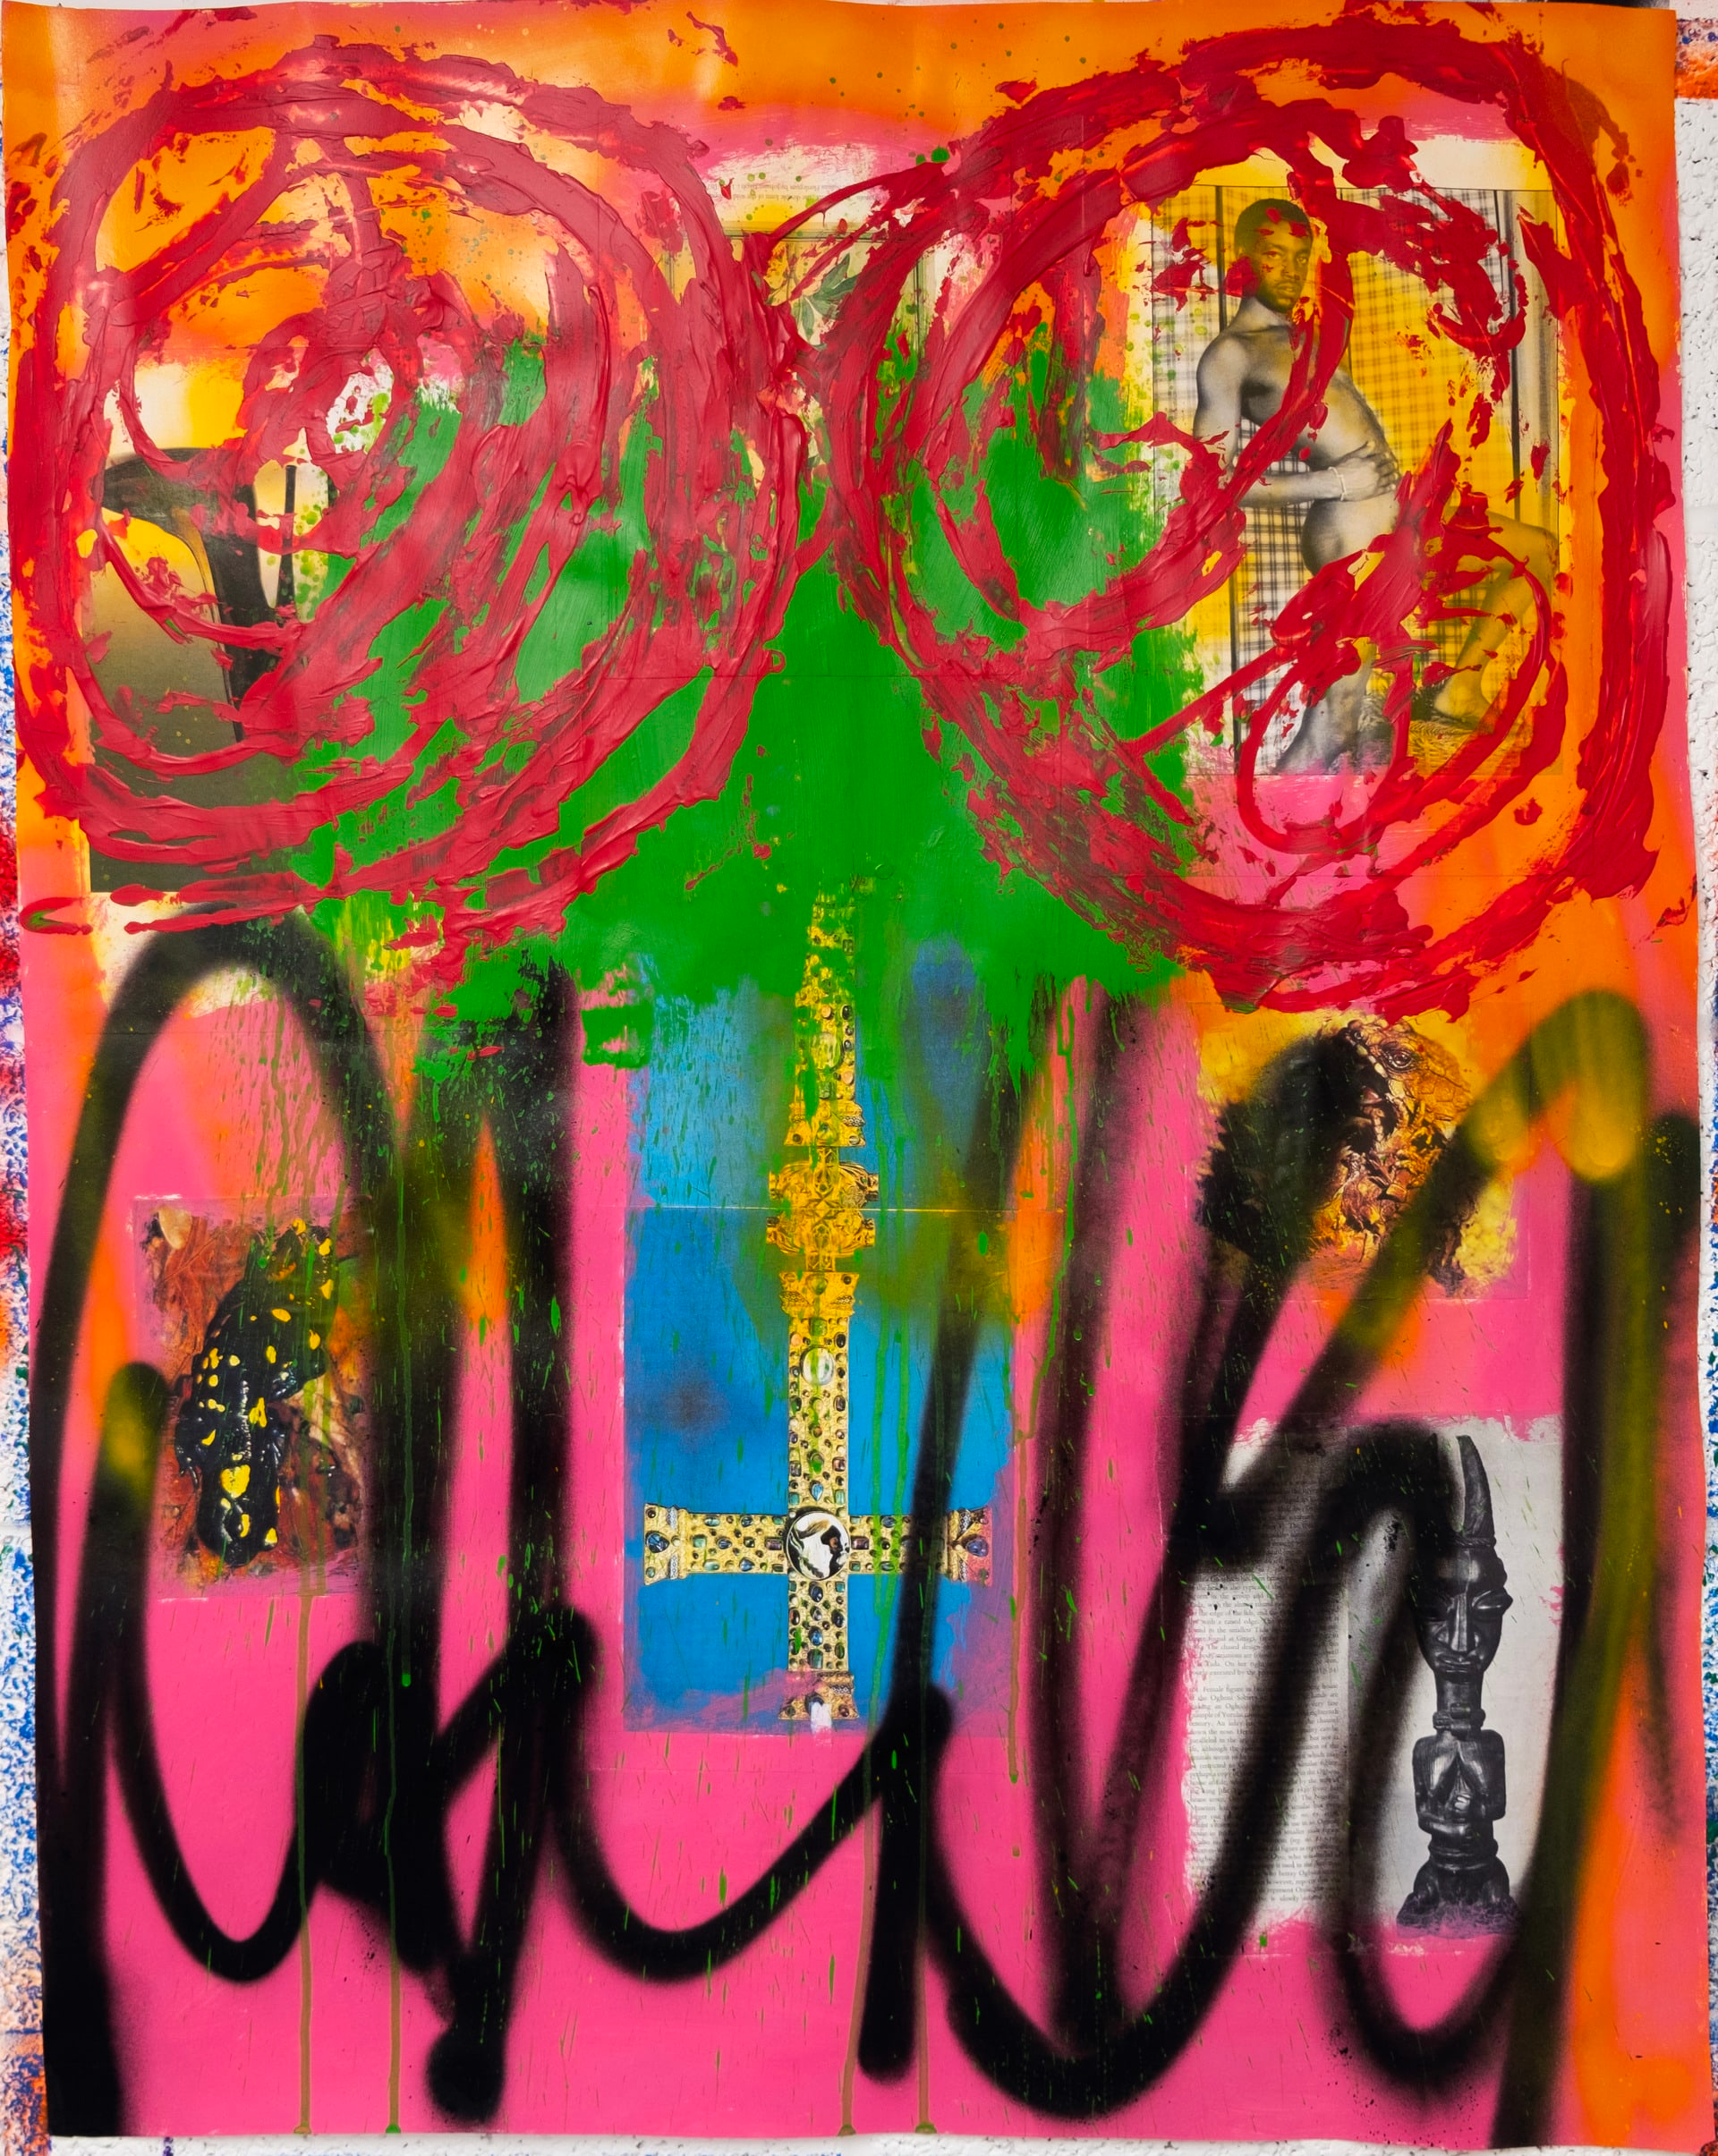 Two red swirls of paint and black, graffiti-style, spray paint, layered over photographic images and a large smudge of green paint, with a bright pink background,